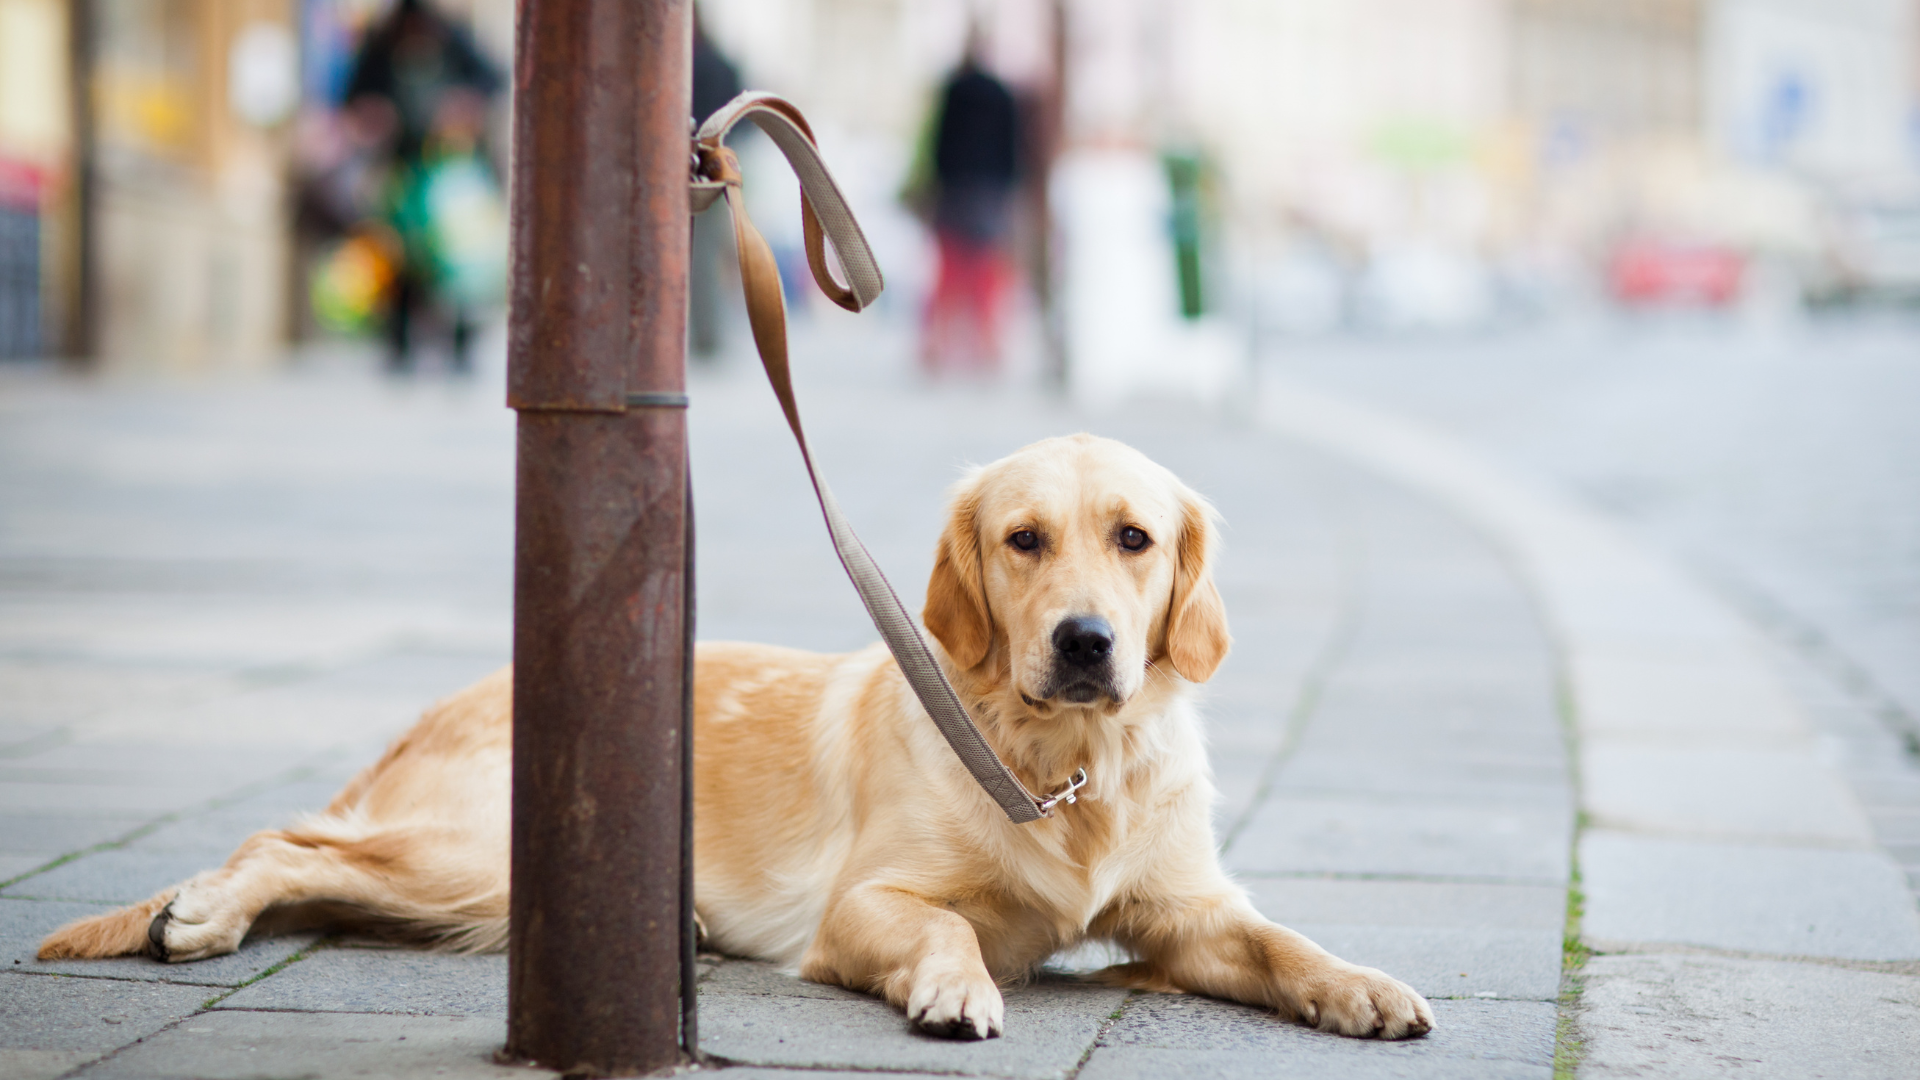 Protecting Your Dog in the City